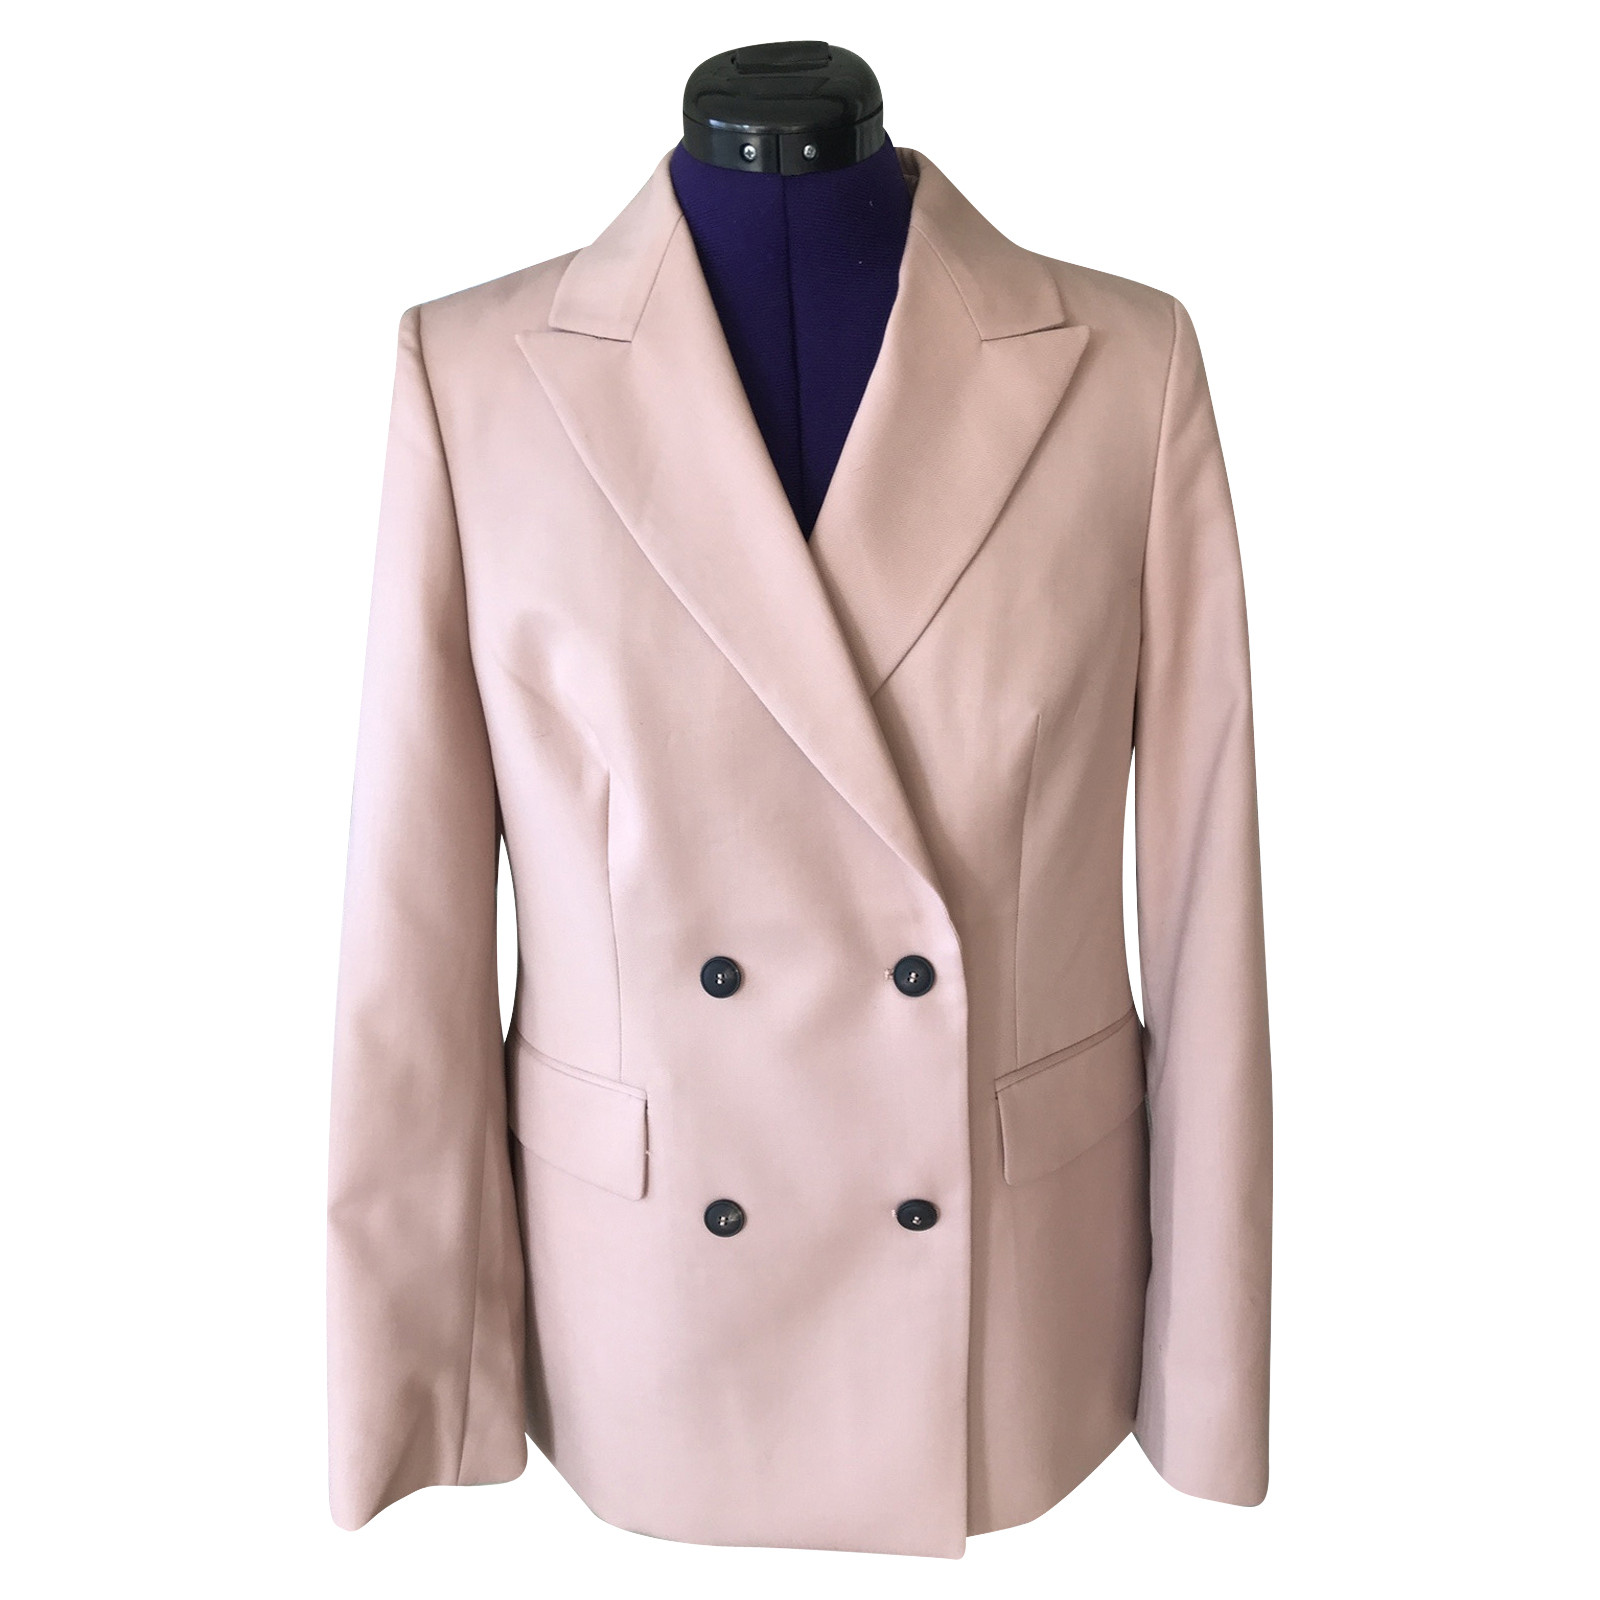 Adolfo Dominguez Jacke/Mantel aus Wolle in Nude - Second Hand Adolfo  Dominguez Jacke/Mantel aus Wolle in Nude buy used for 179€ (4294027)